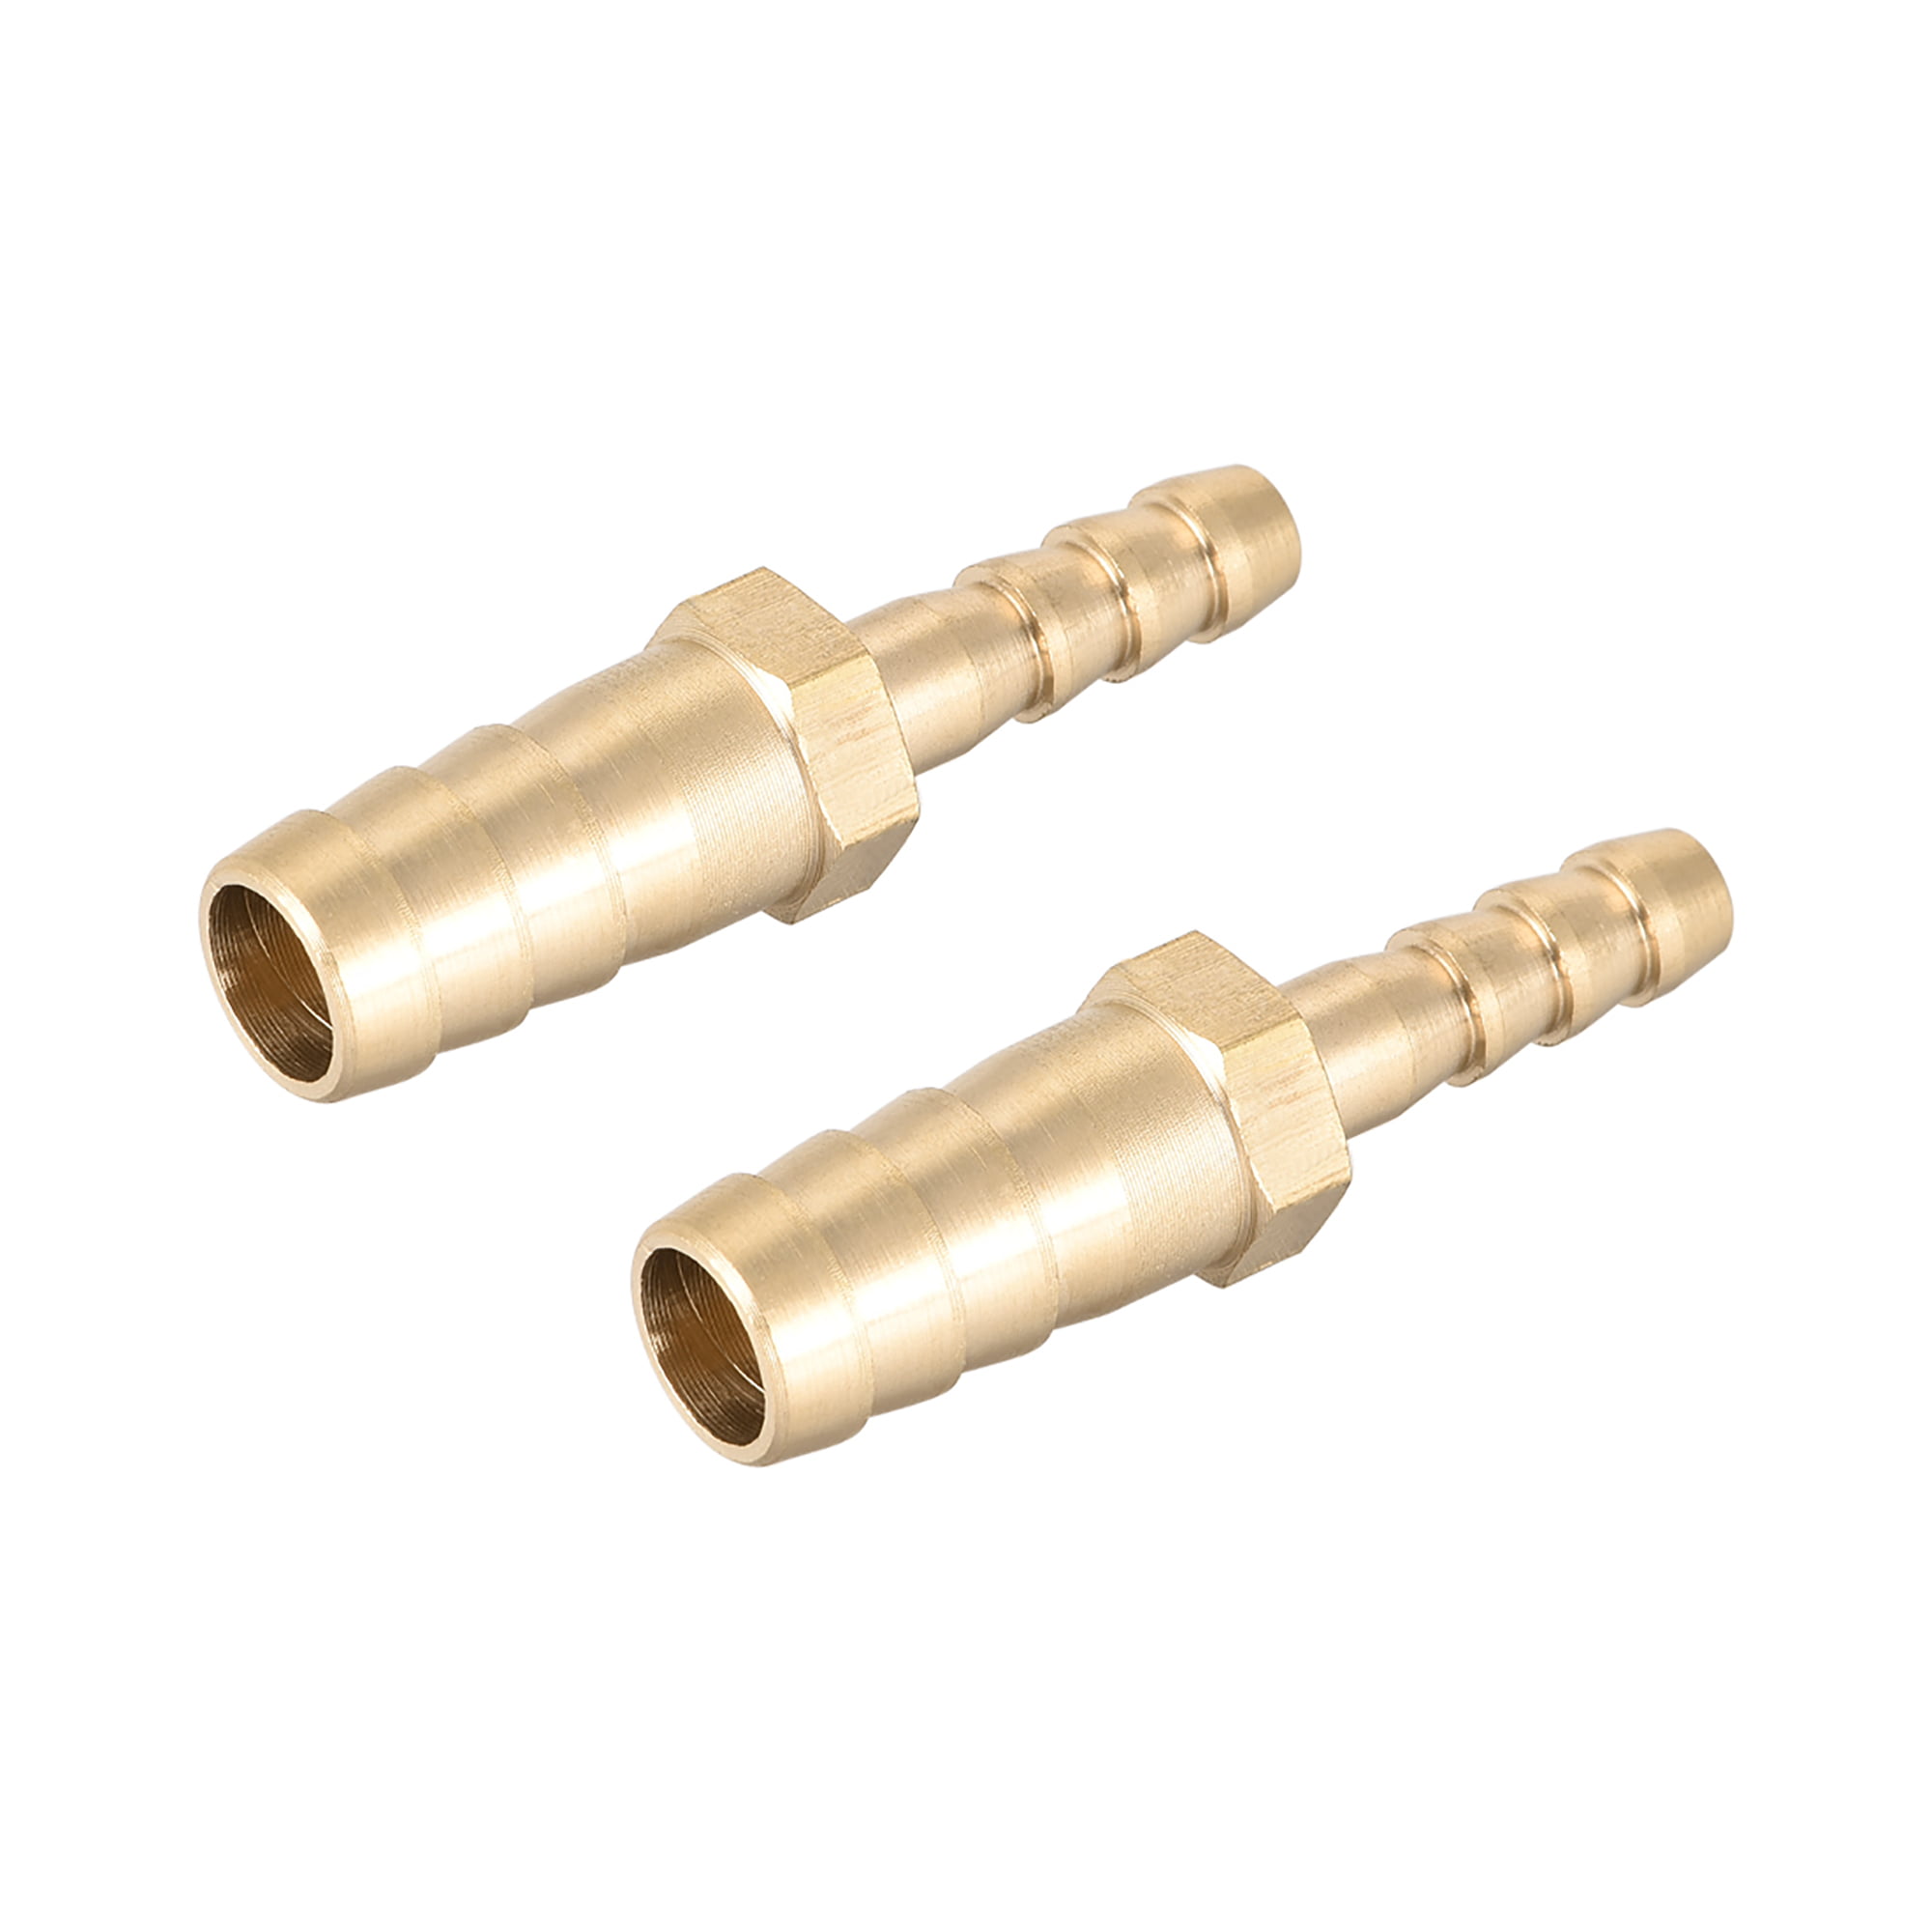 Brass Straight Barbed Hose Joiner Connector For 5-25mm Water Air Fuel Tubing ID 